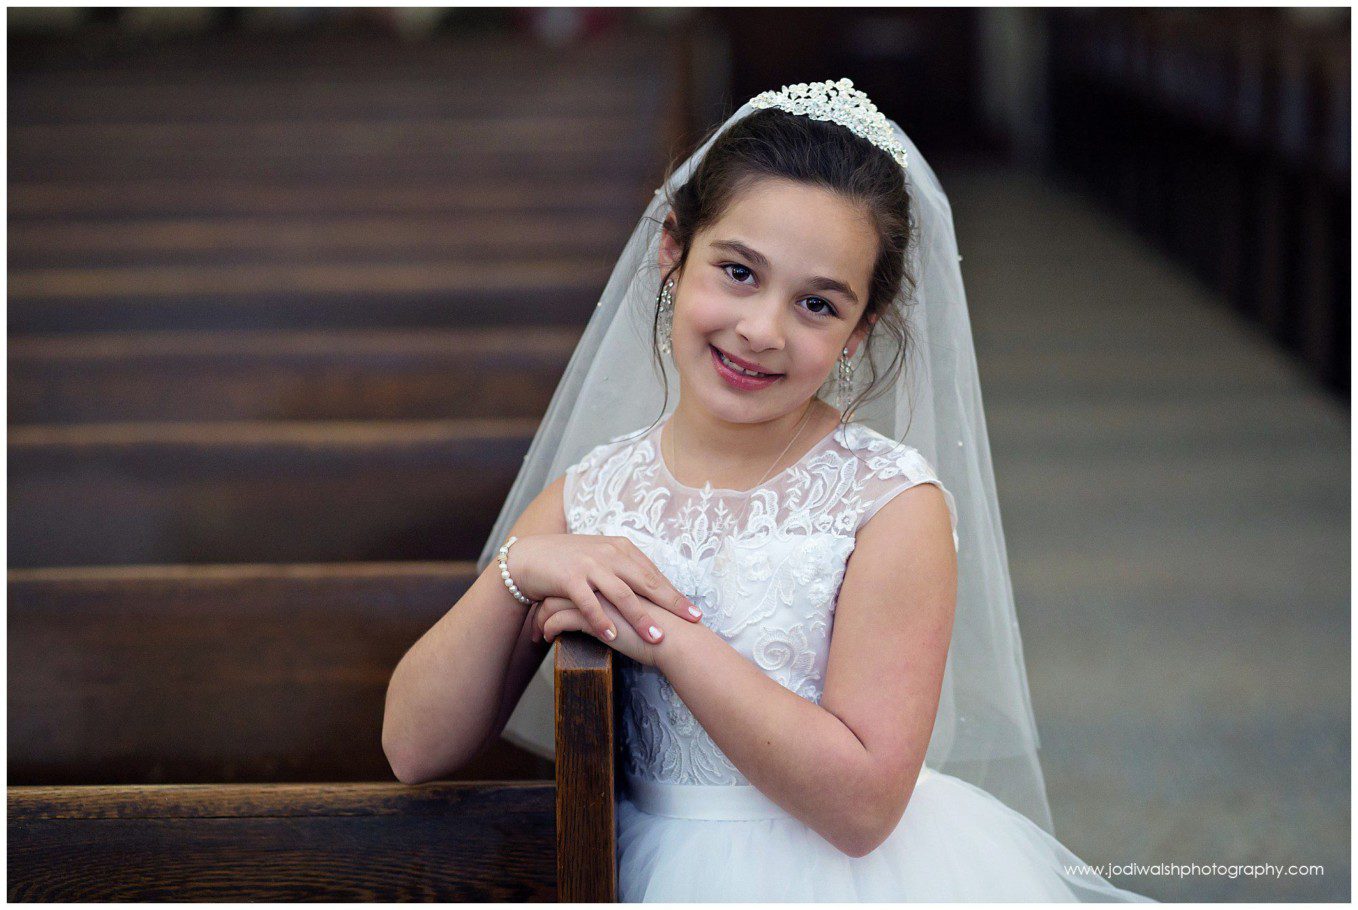 image of a little girl in first holy communion dress, standing next to church pew.  She's looking at the camera and smiling.